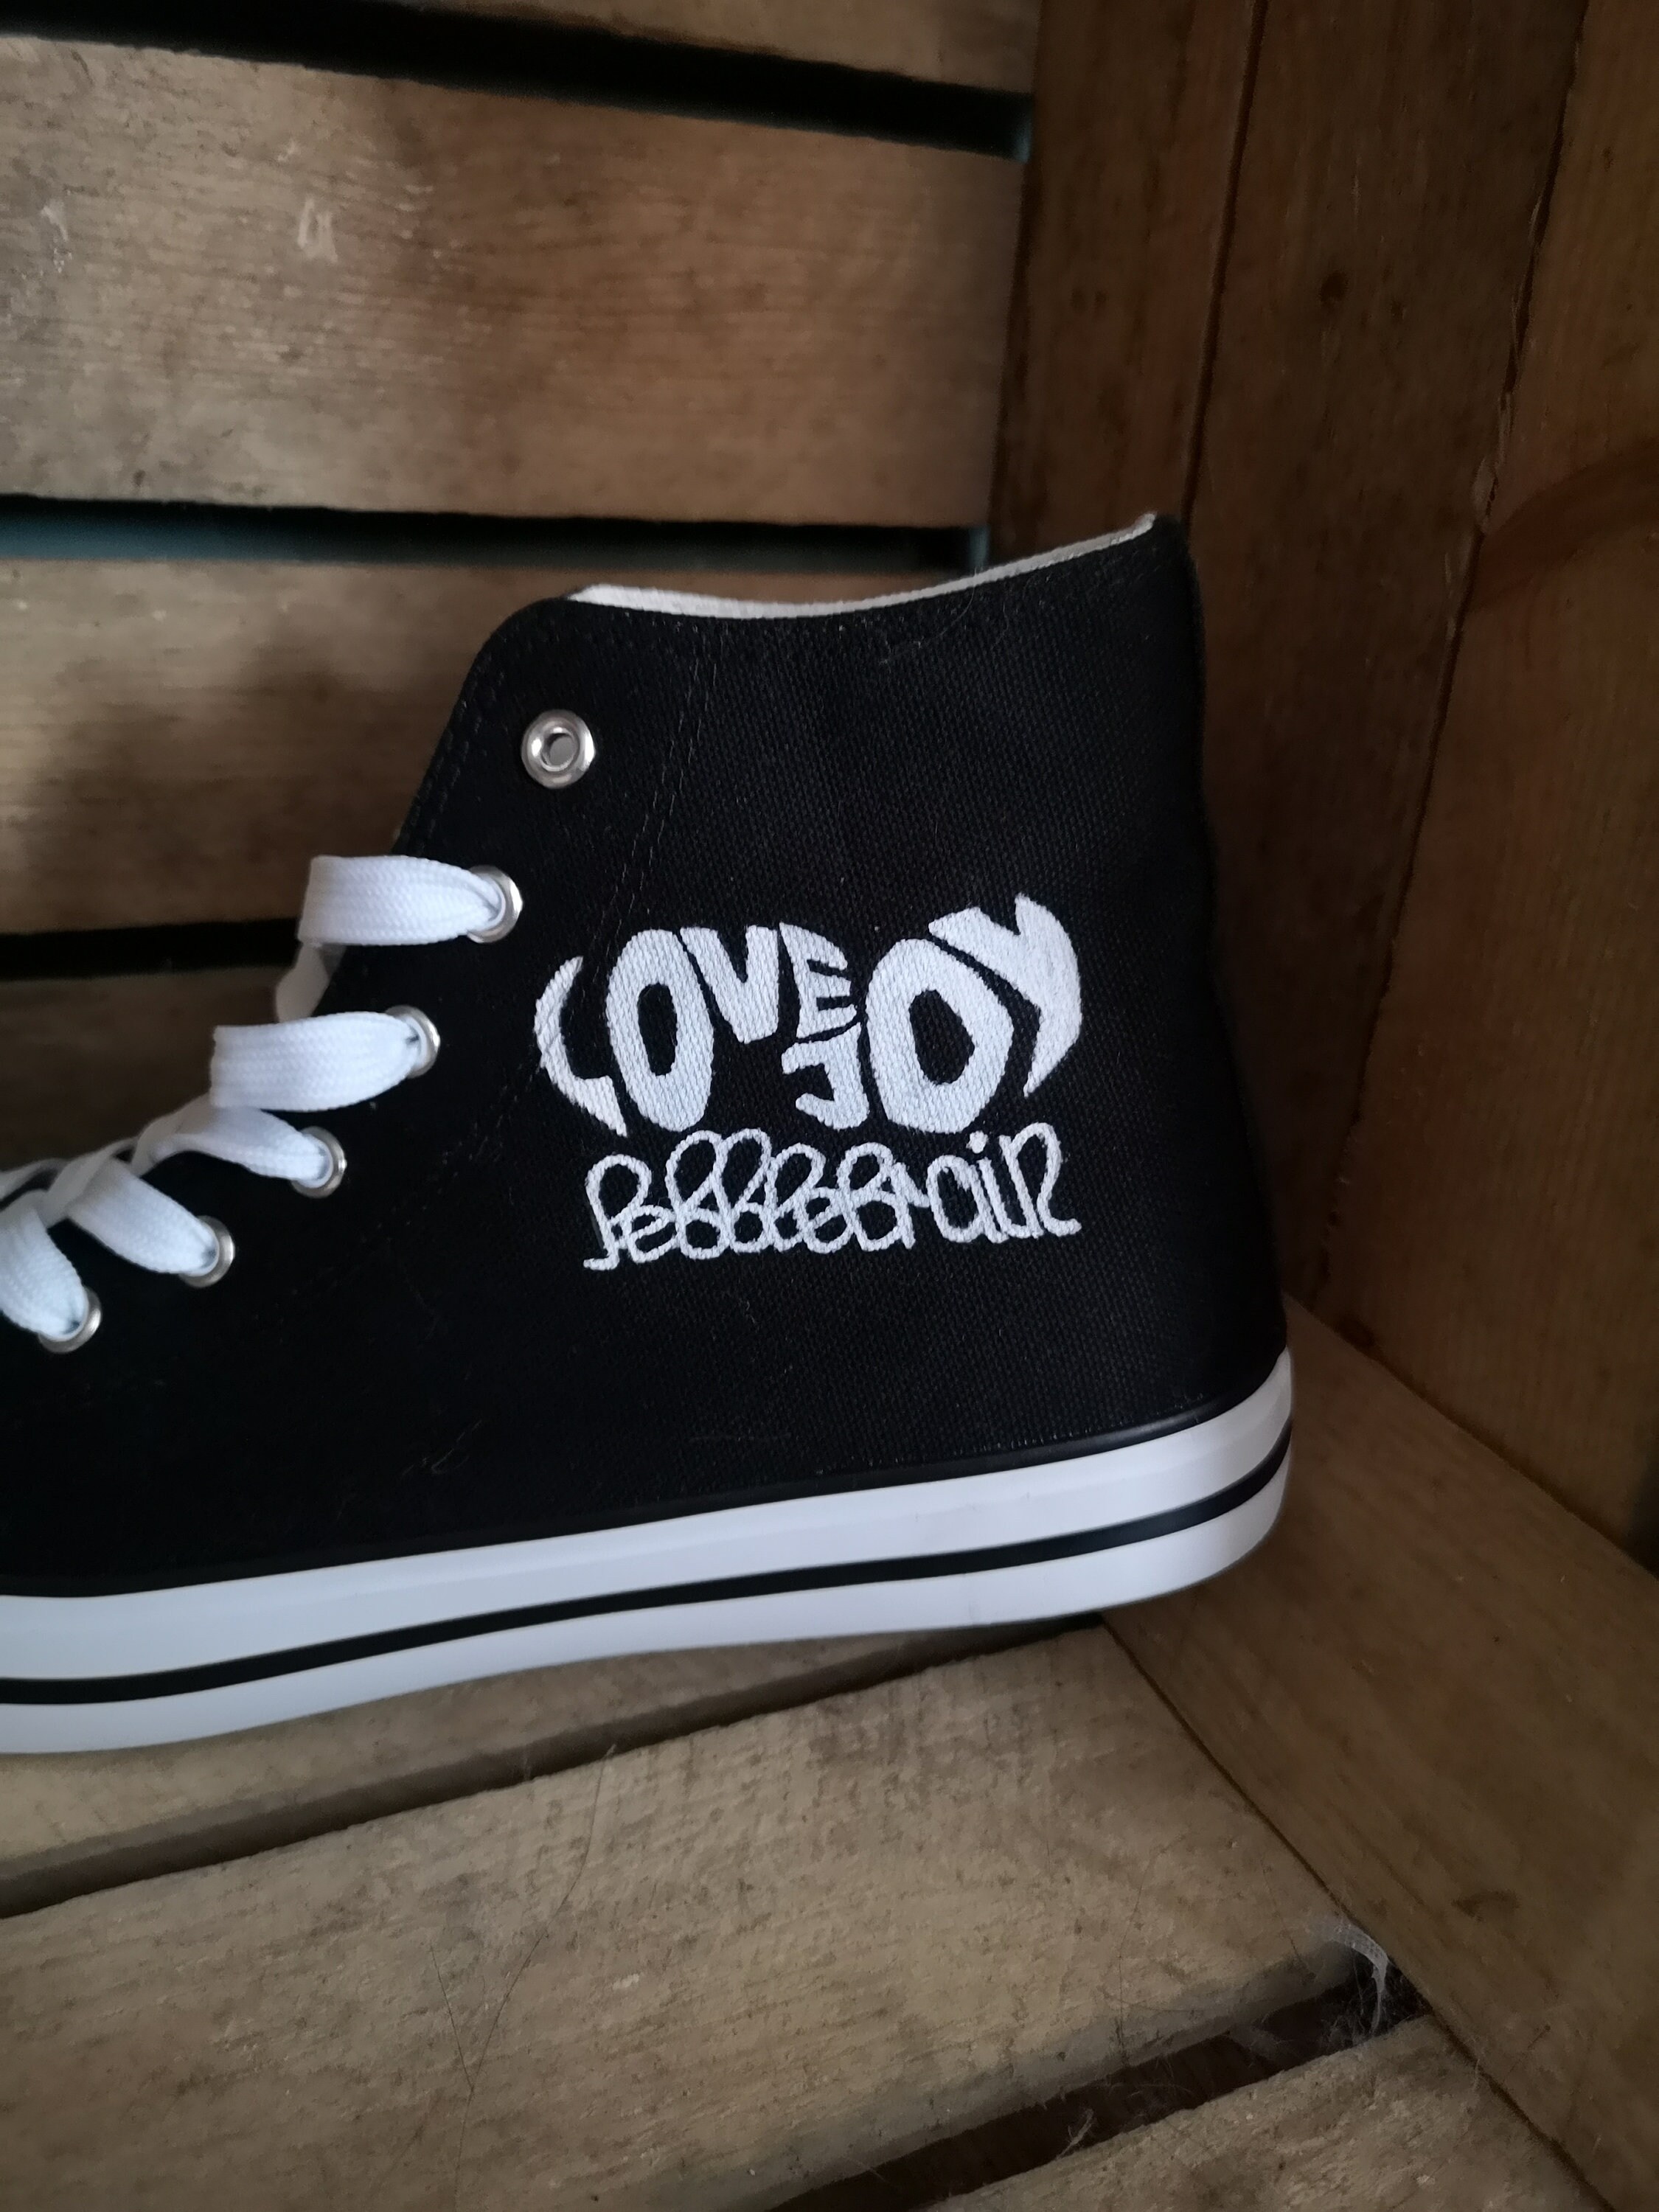 Logo-Covered Custom Sneakers Are Clickbait—And Nothing More